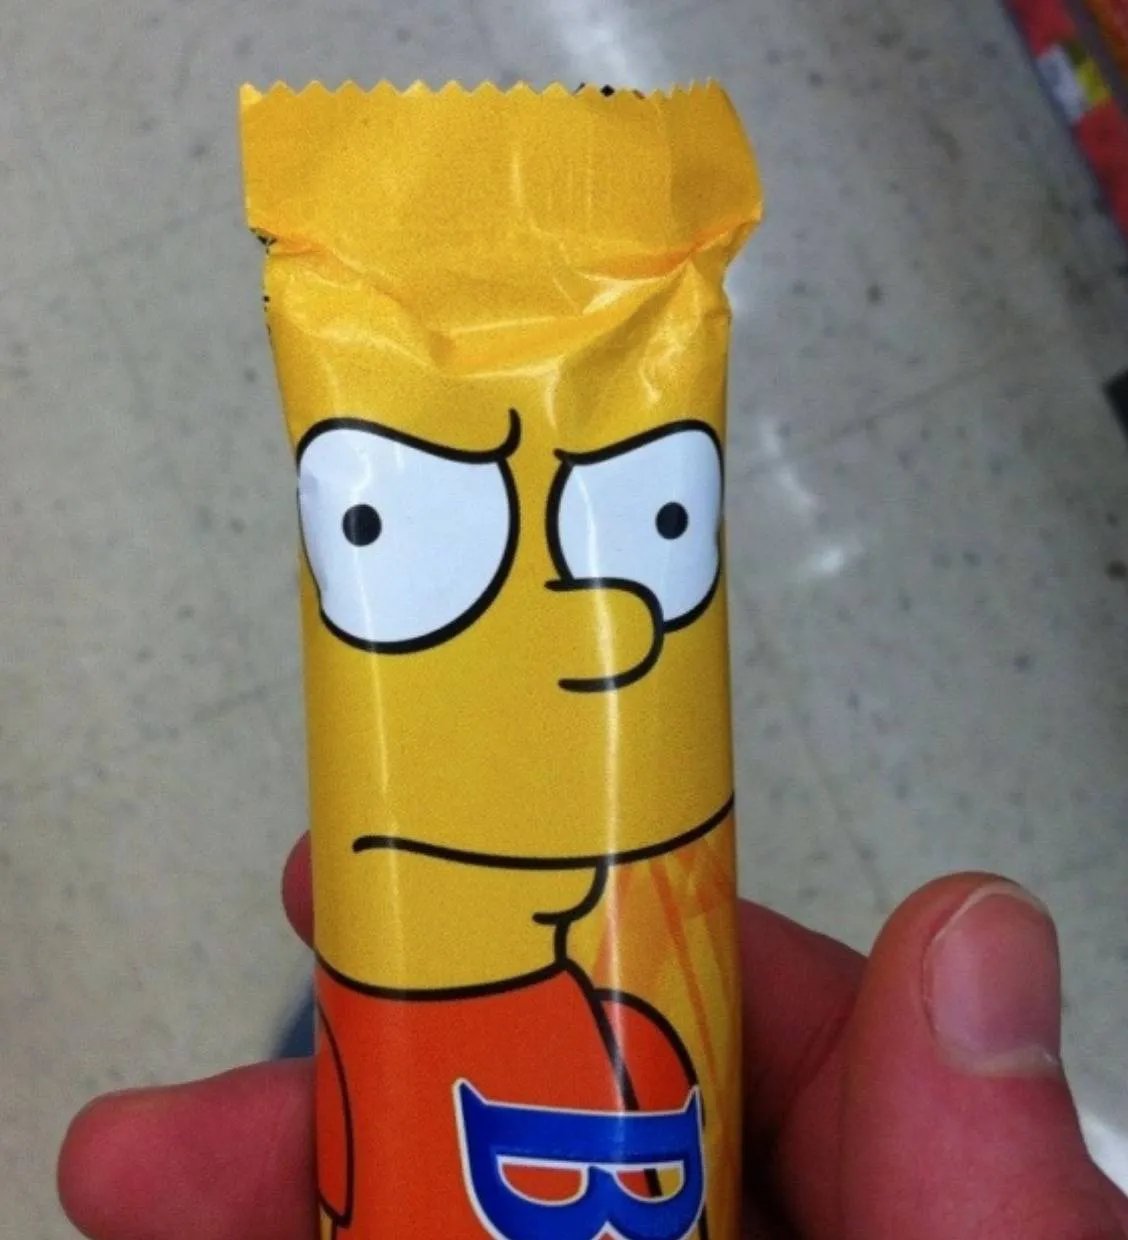 candy bar with bart simpson on it has jagged edges like his hair on the show